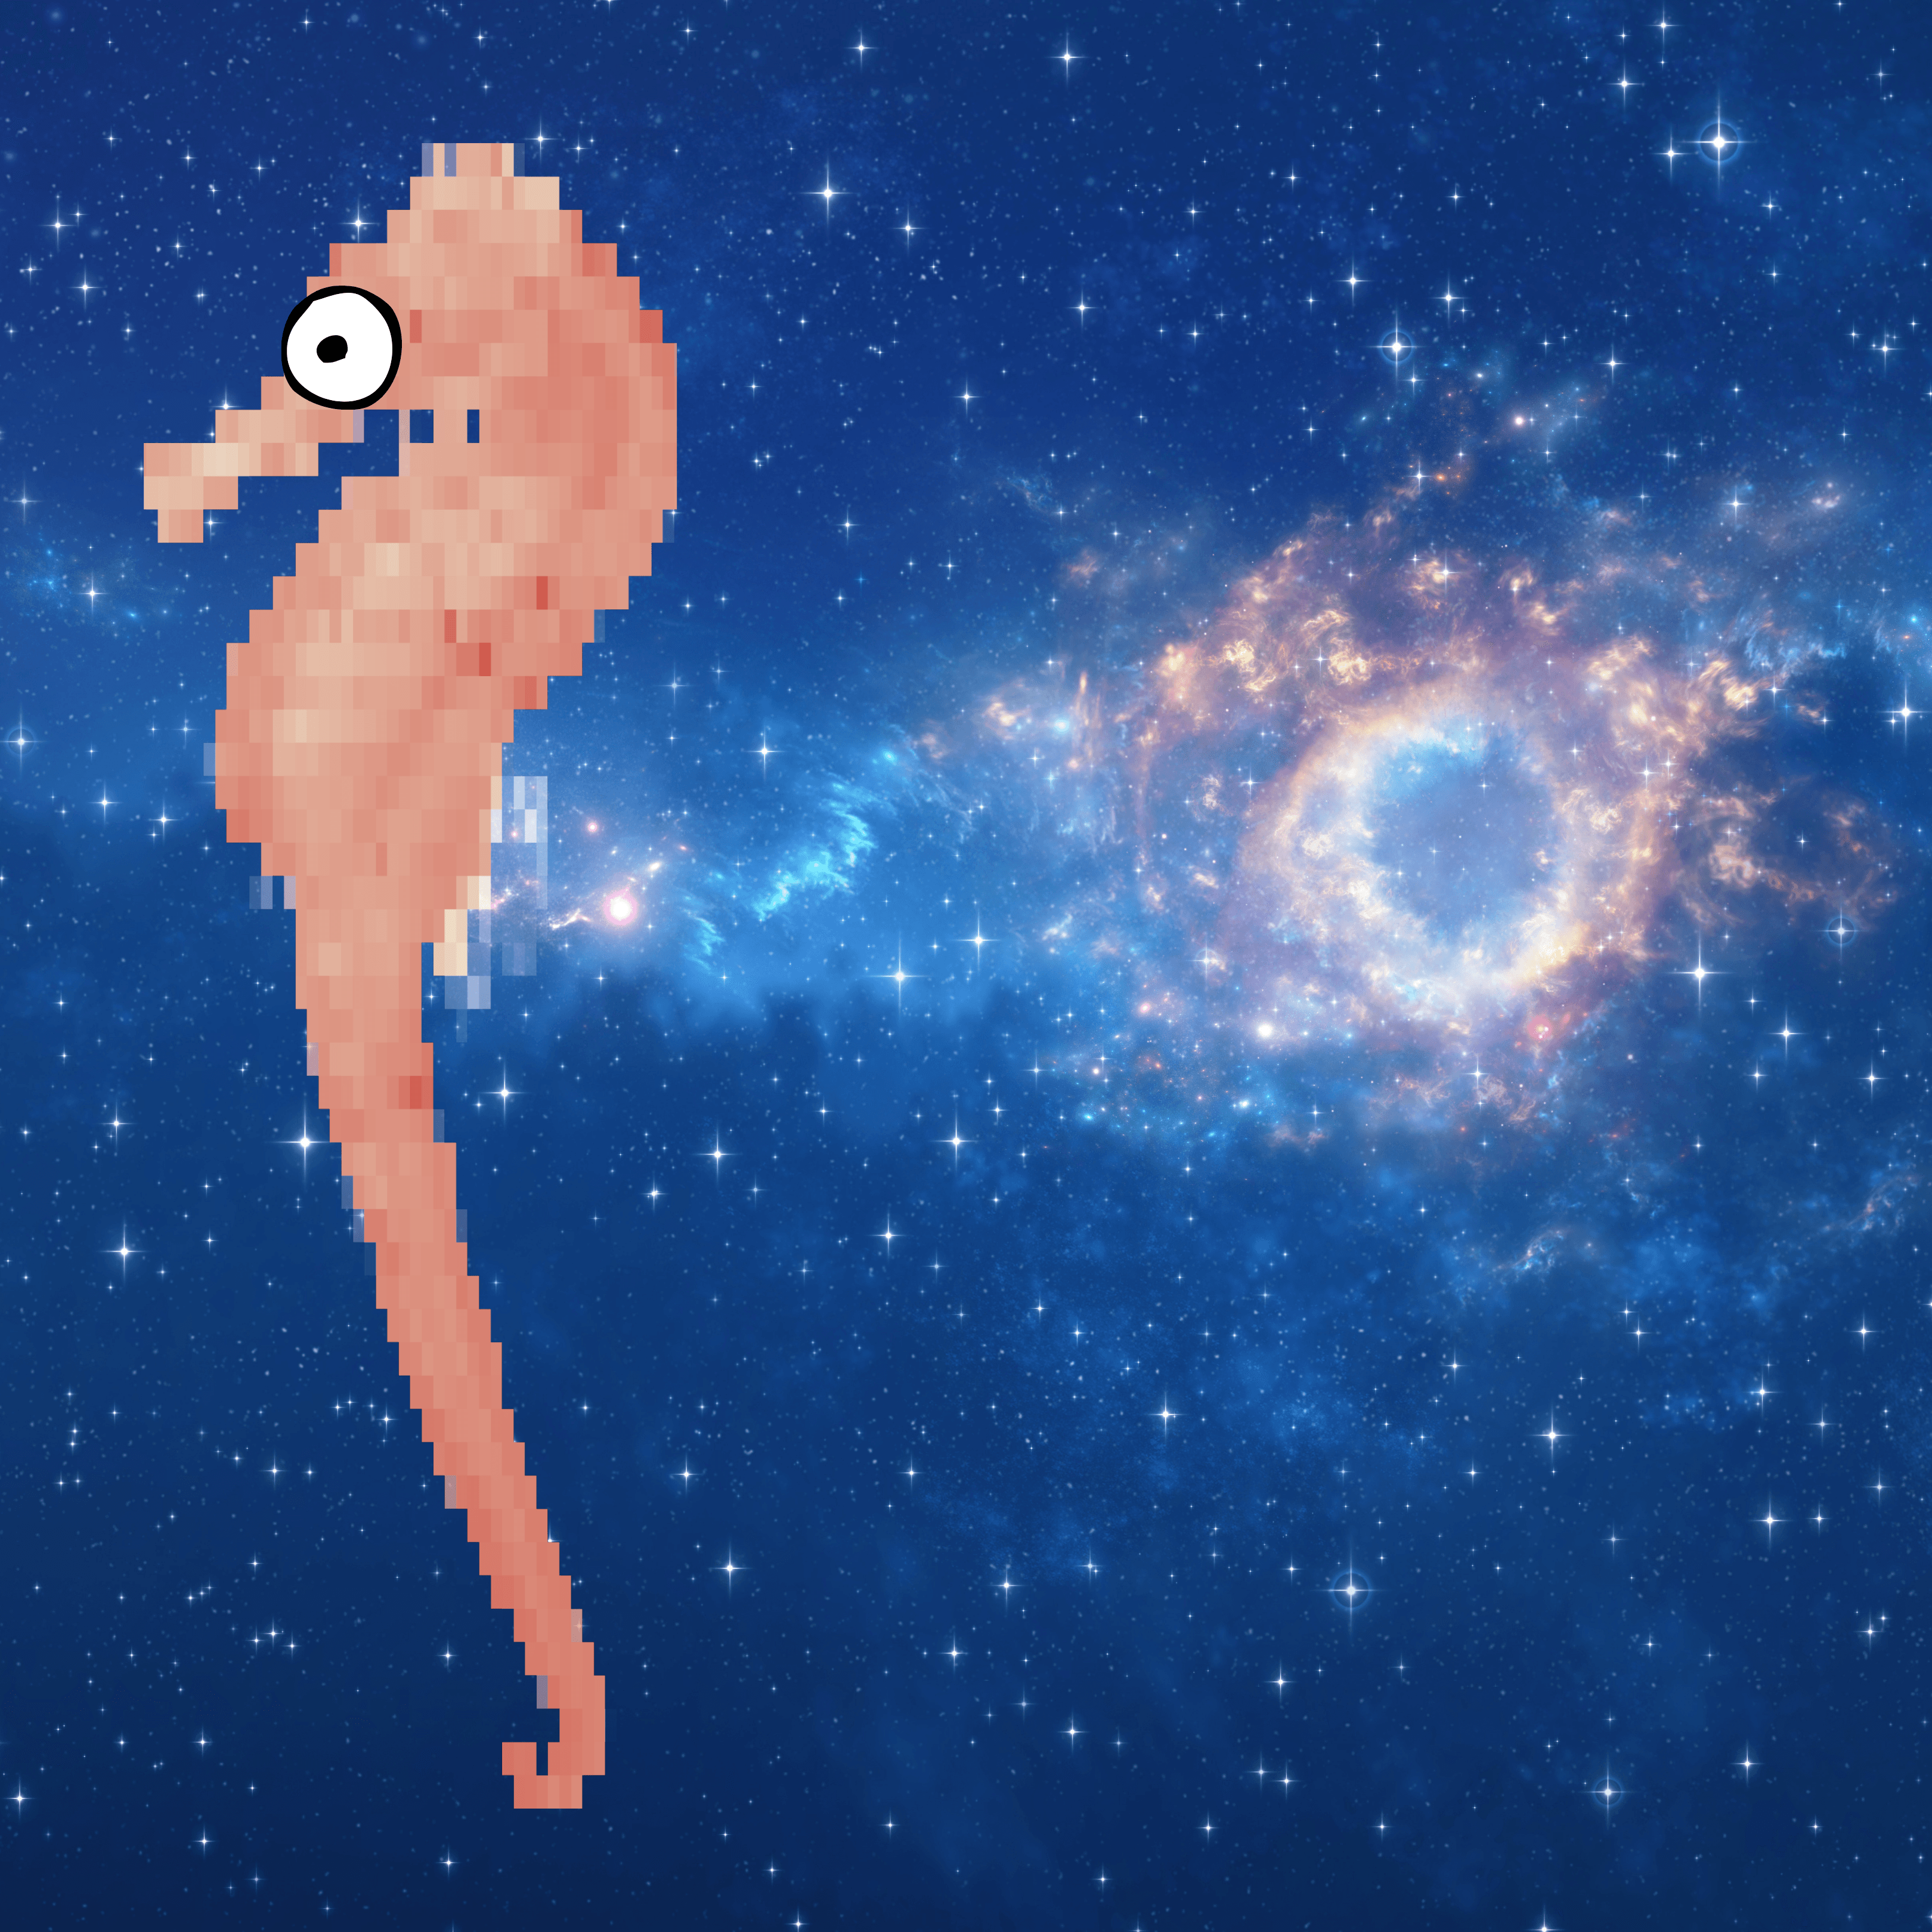 Seahorse in Space XIX